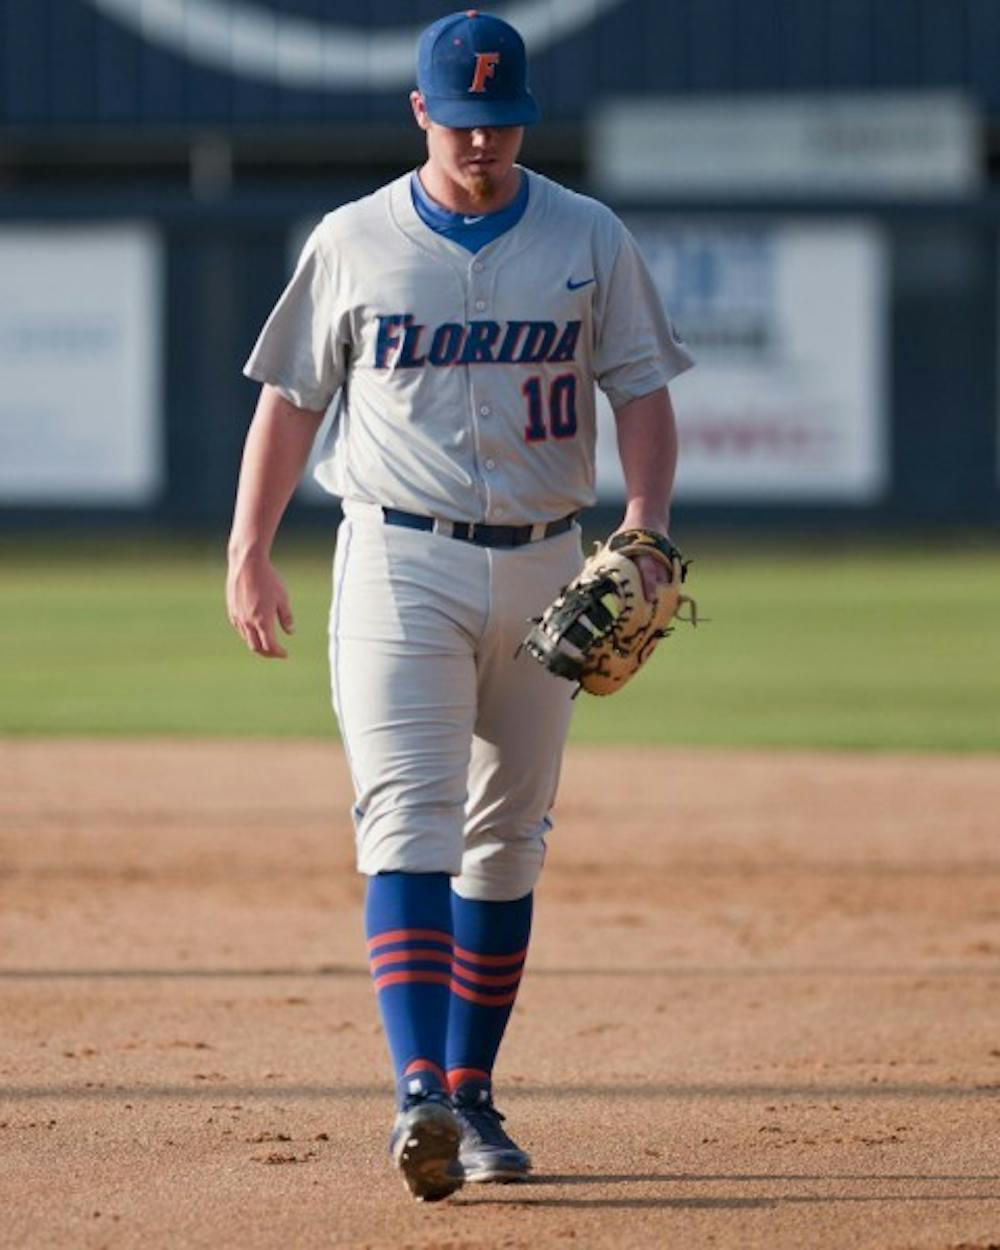 <p>Florida first baseman and relief pitcher Austin Maddox walks off the field during UF’s 10-5 loss to North Florida on Tuesday. Maddox and the Gators combined to commit three errors.</p>